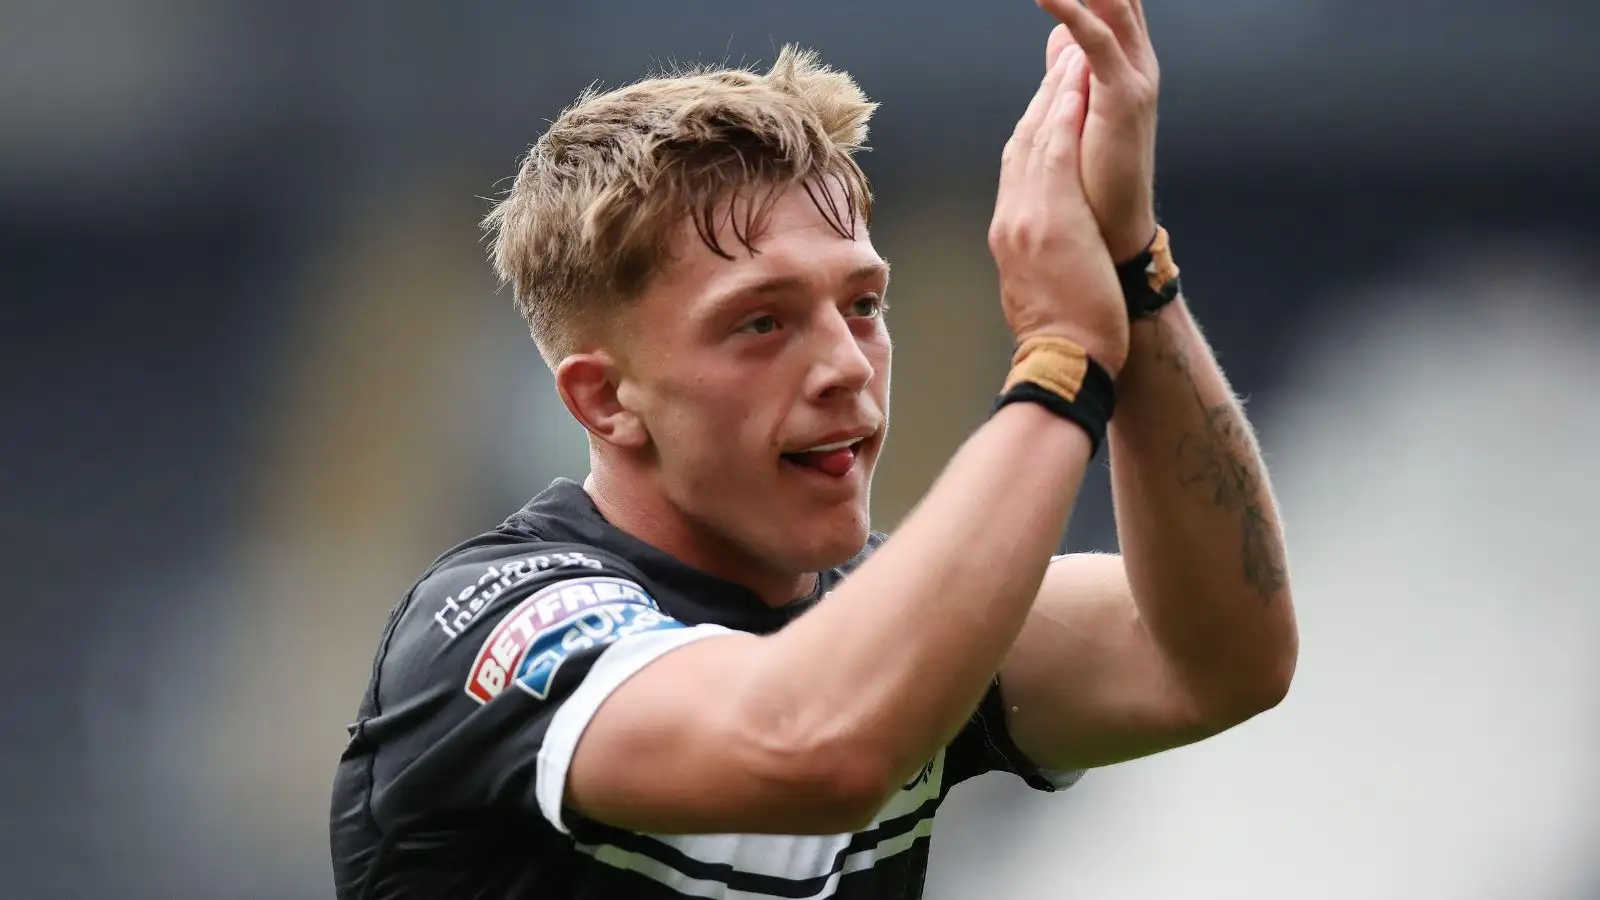 NextGen: Meet the Hull FC fullback tipped for Super League stardom who coaches ‘fell in love with’